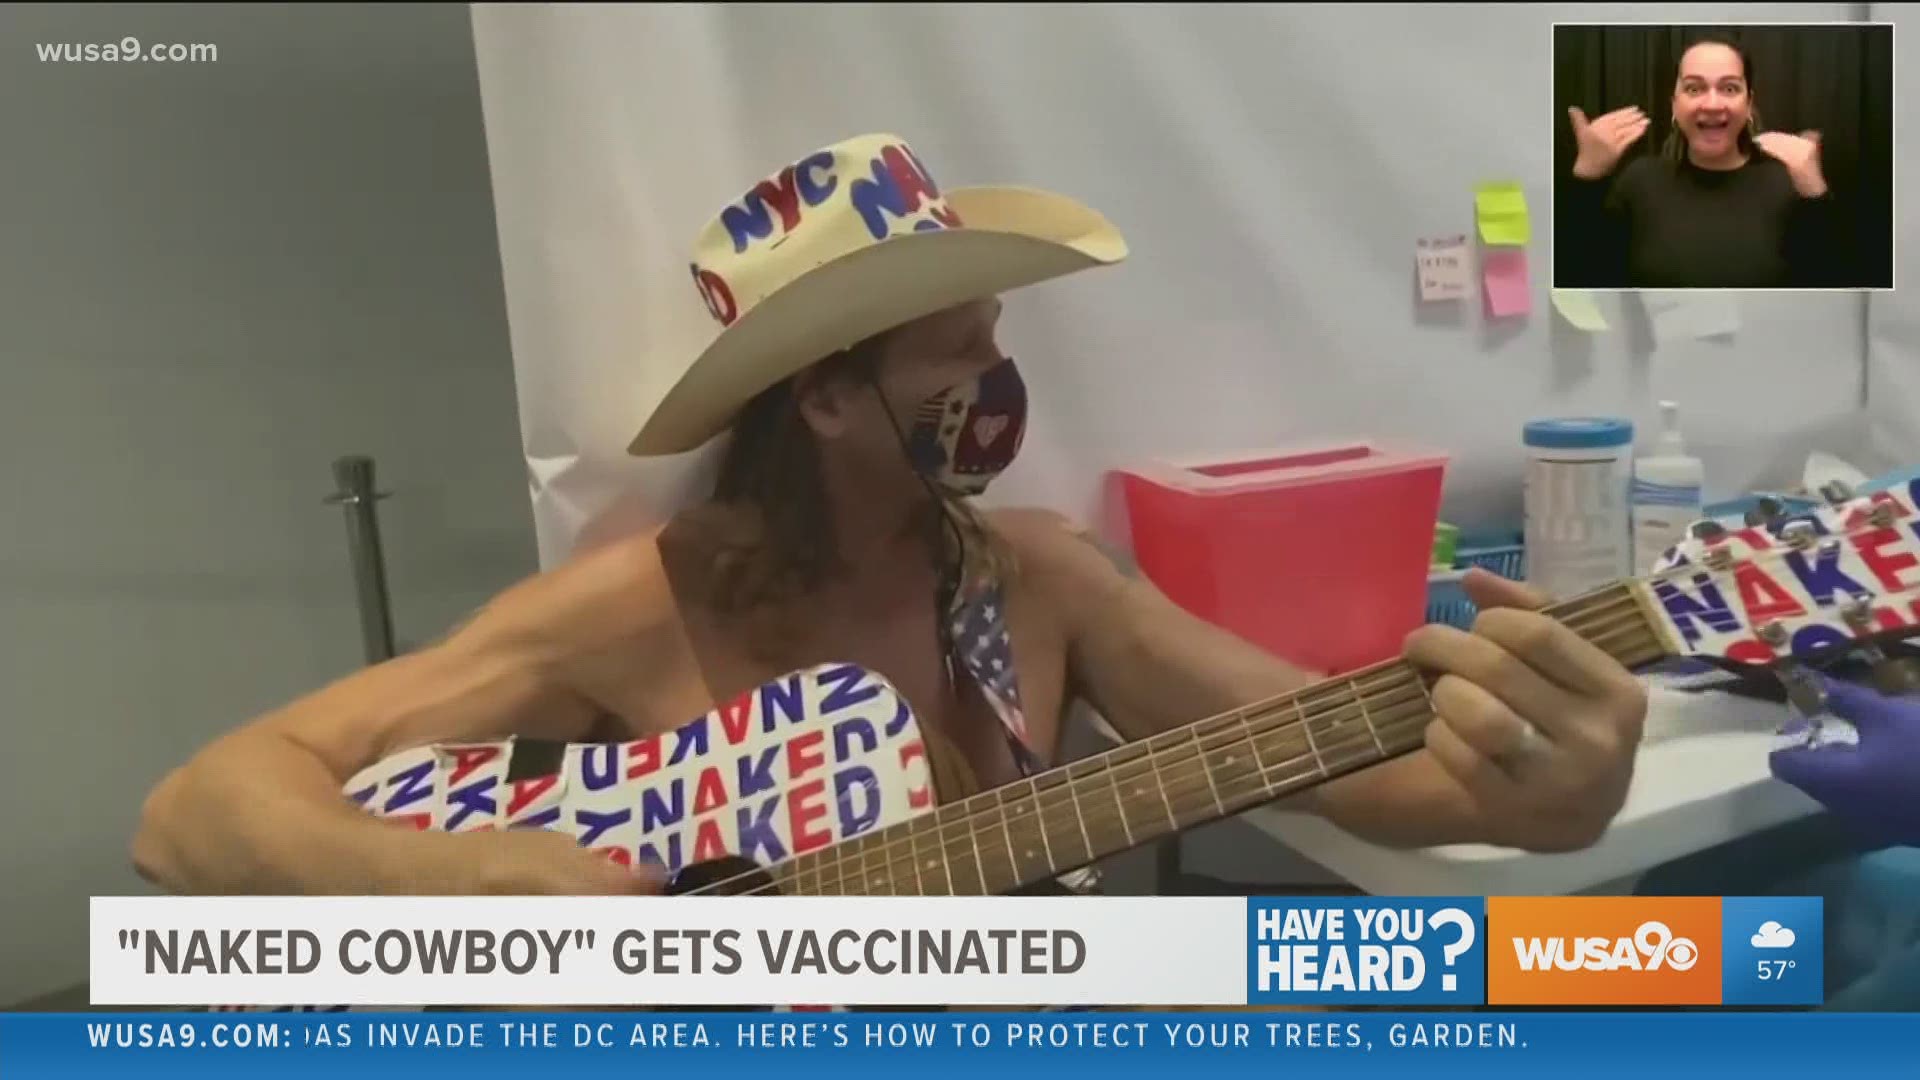 "Naked Cowboy" gets vaccinated in Times Square